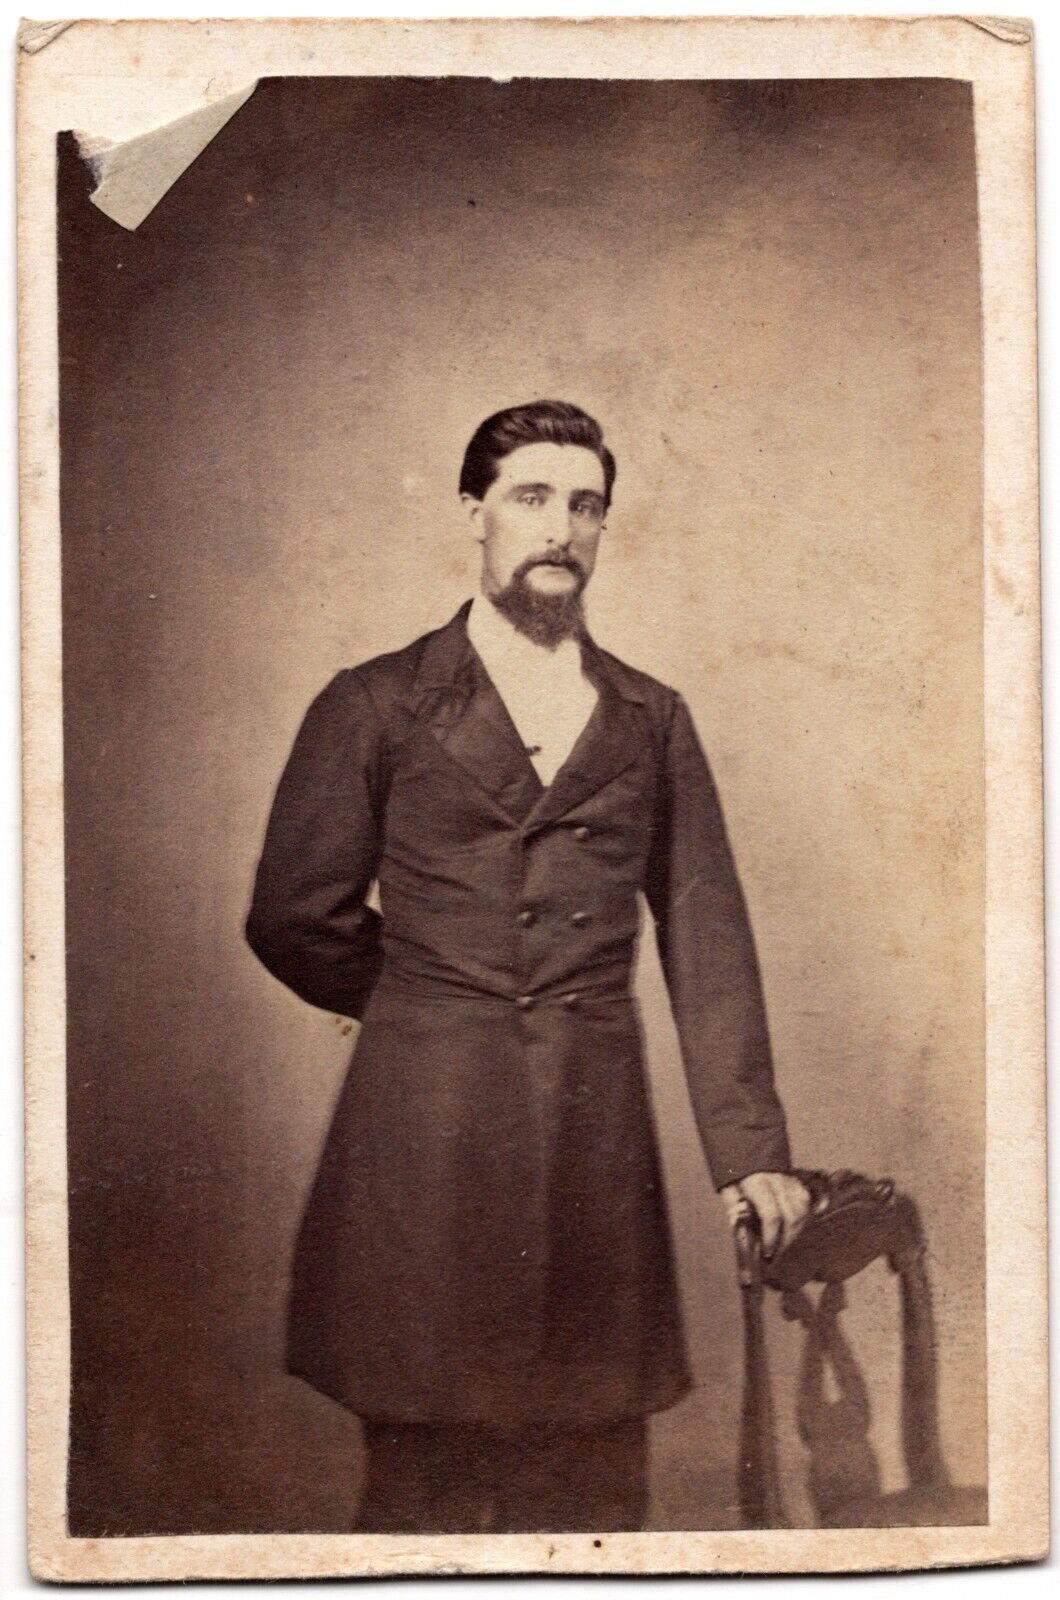 ANTIQUE CDV CIRCA 1860s GORGAS HANDSOME BEARDED MAN IN SUIT MADISON INDIANA